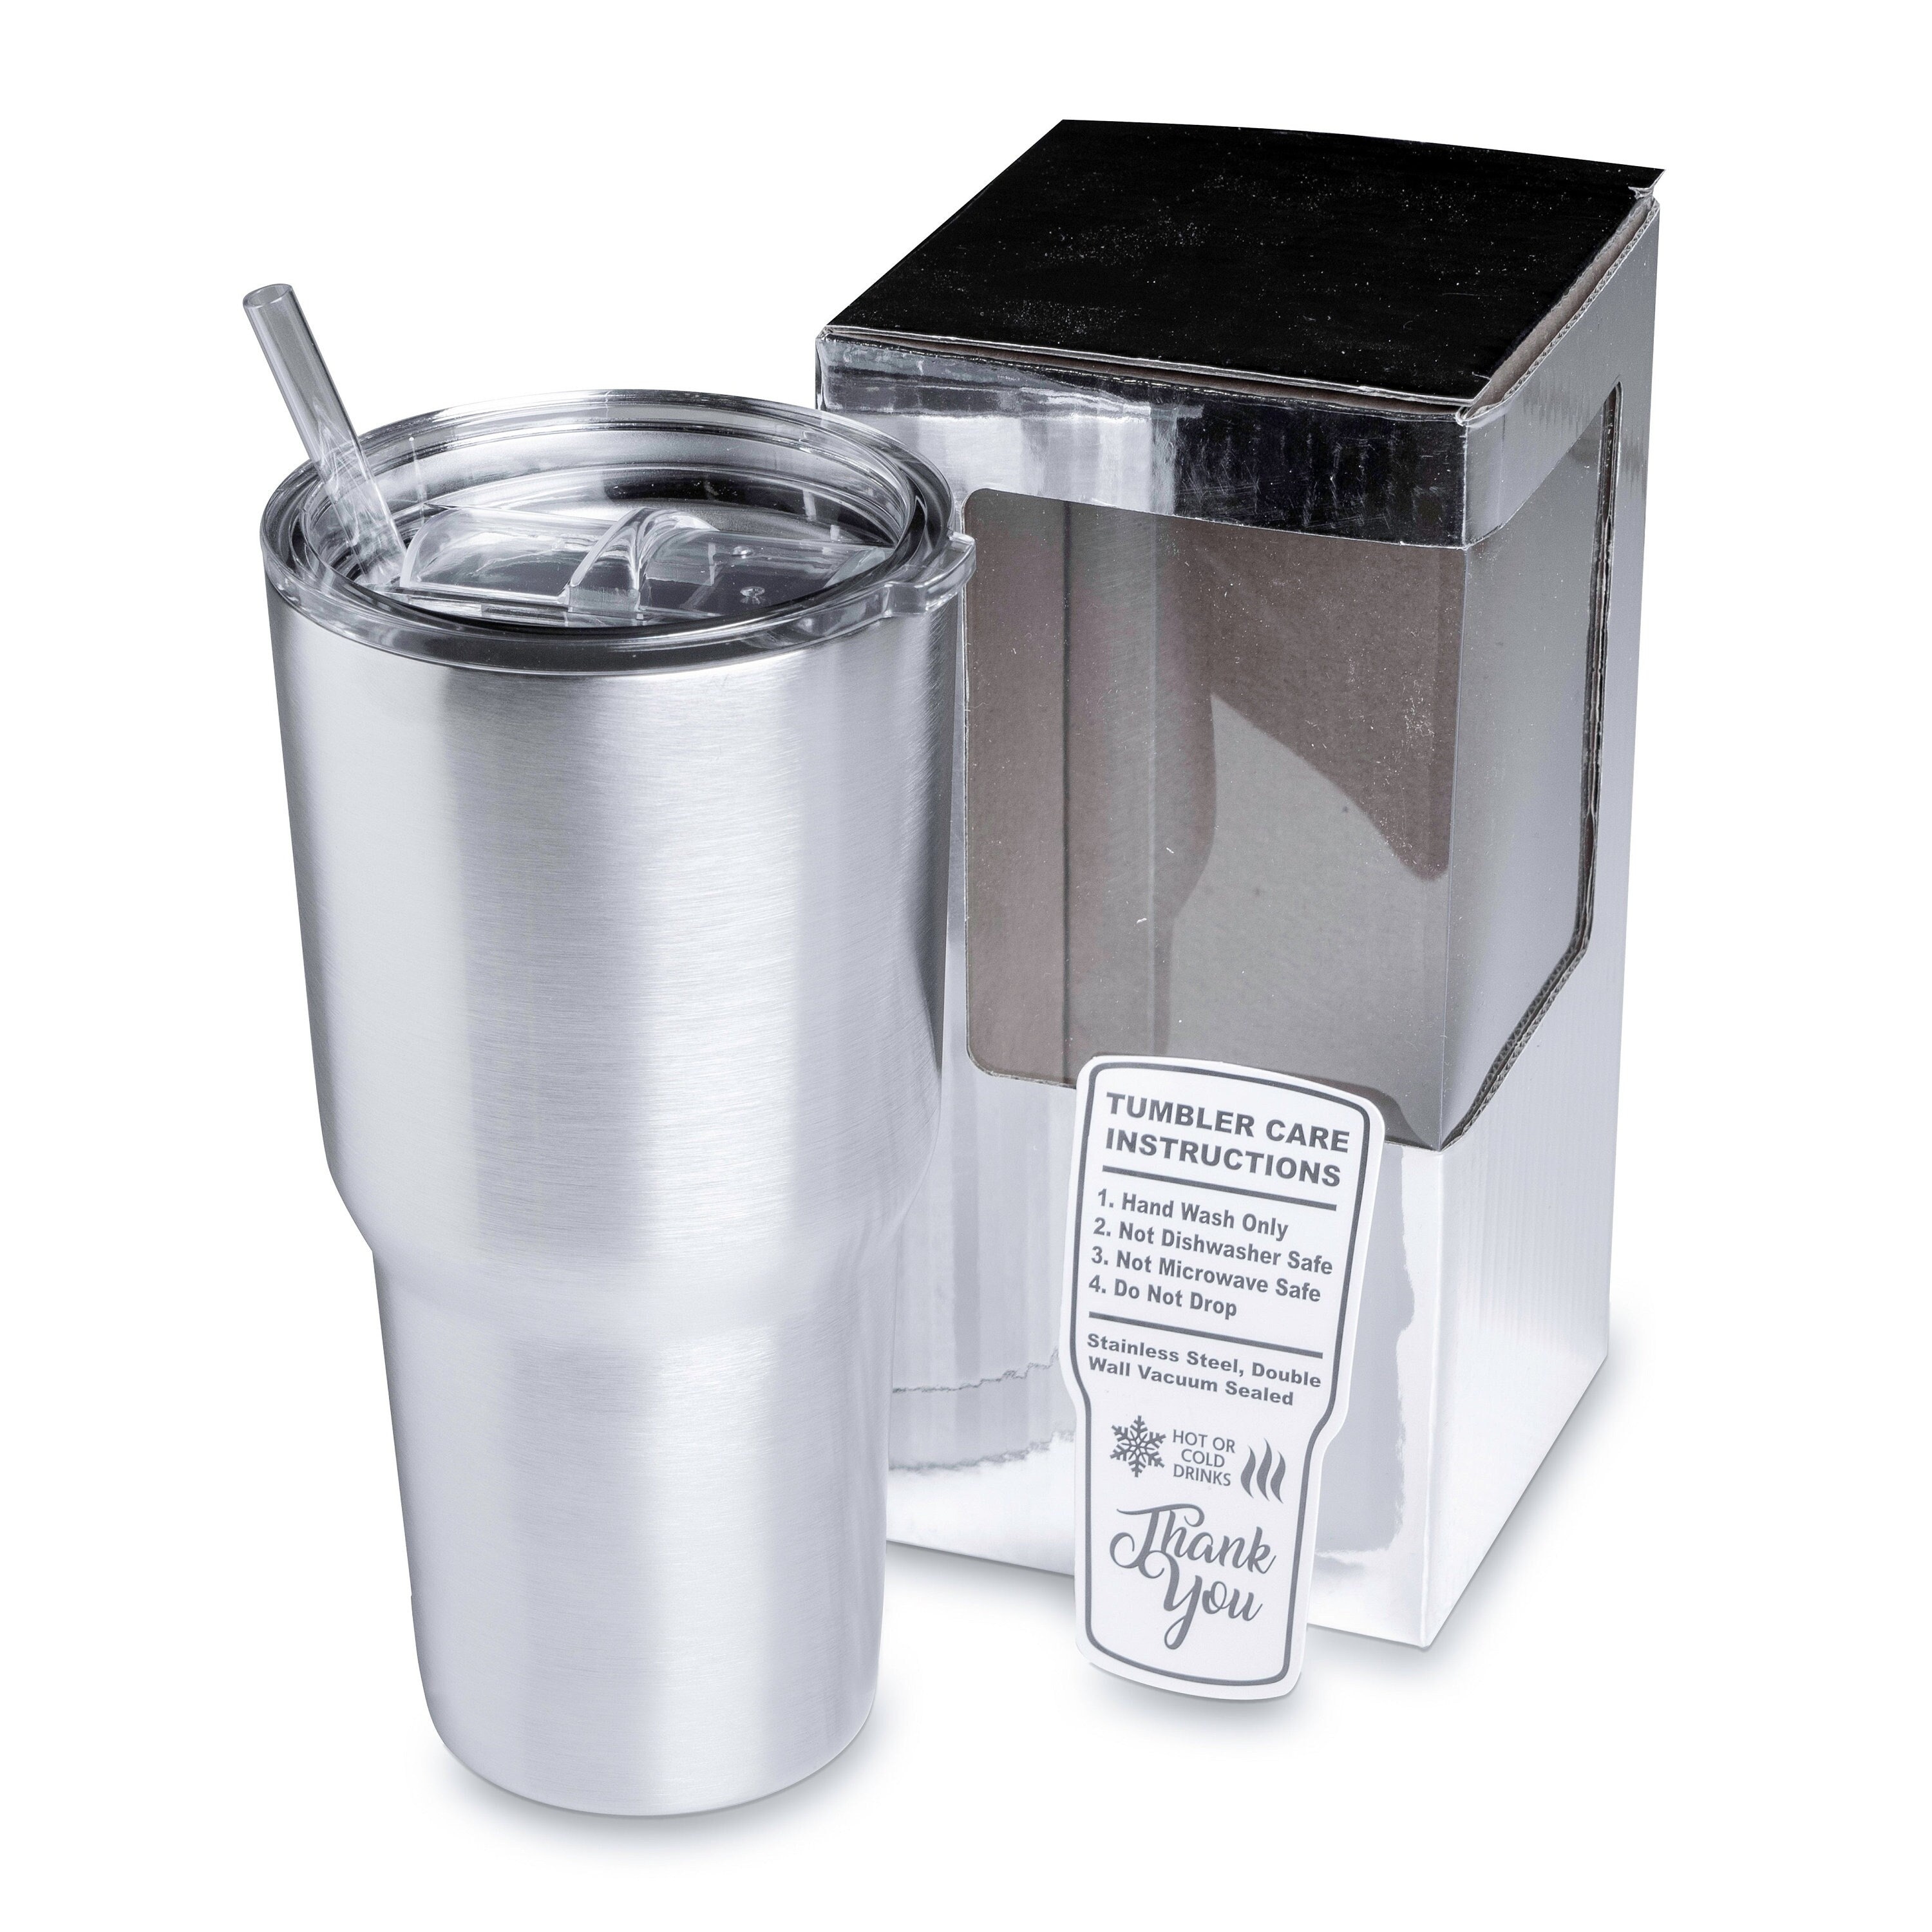 Makerflo 20 Oz Stainless Steel Insulated Tumbler w/ Splash Proof Lid &  Straw, Silver